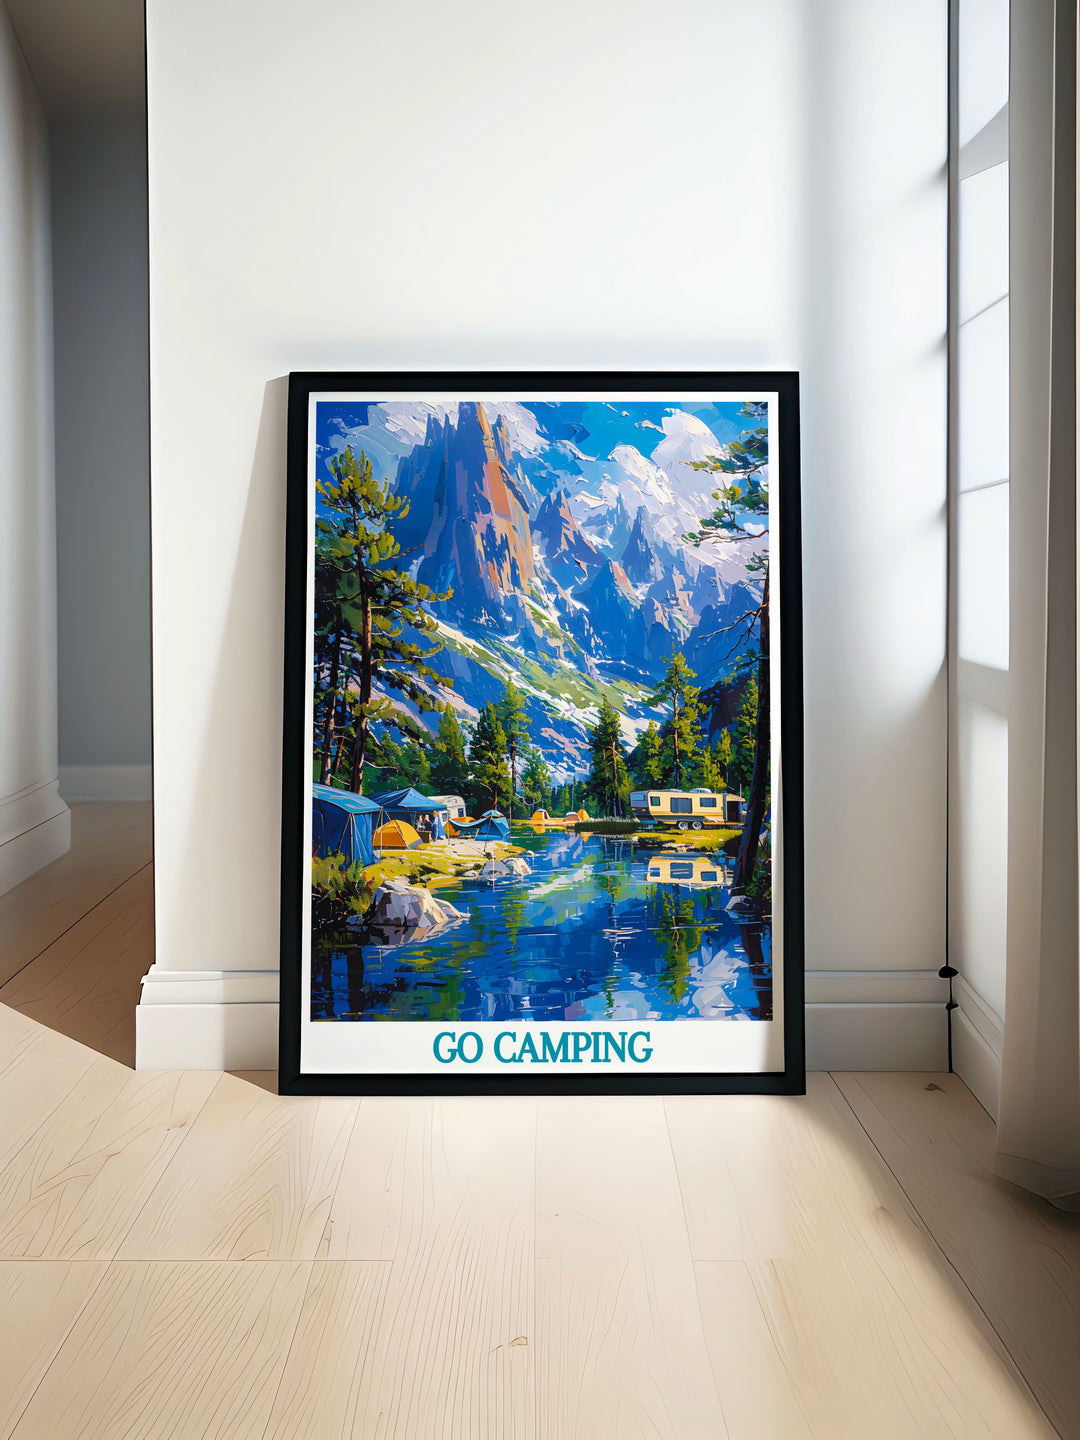 Custom print of a mountain camping site, illustrating the beauty of outdoor adventures and the tranquility of natures highest peaks, ideal for those who appreciate the simple pleasures of vanlife.